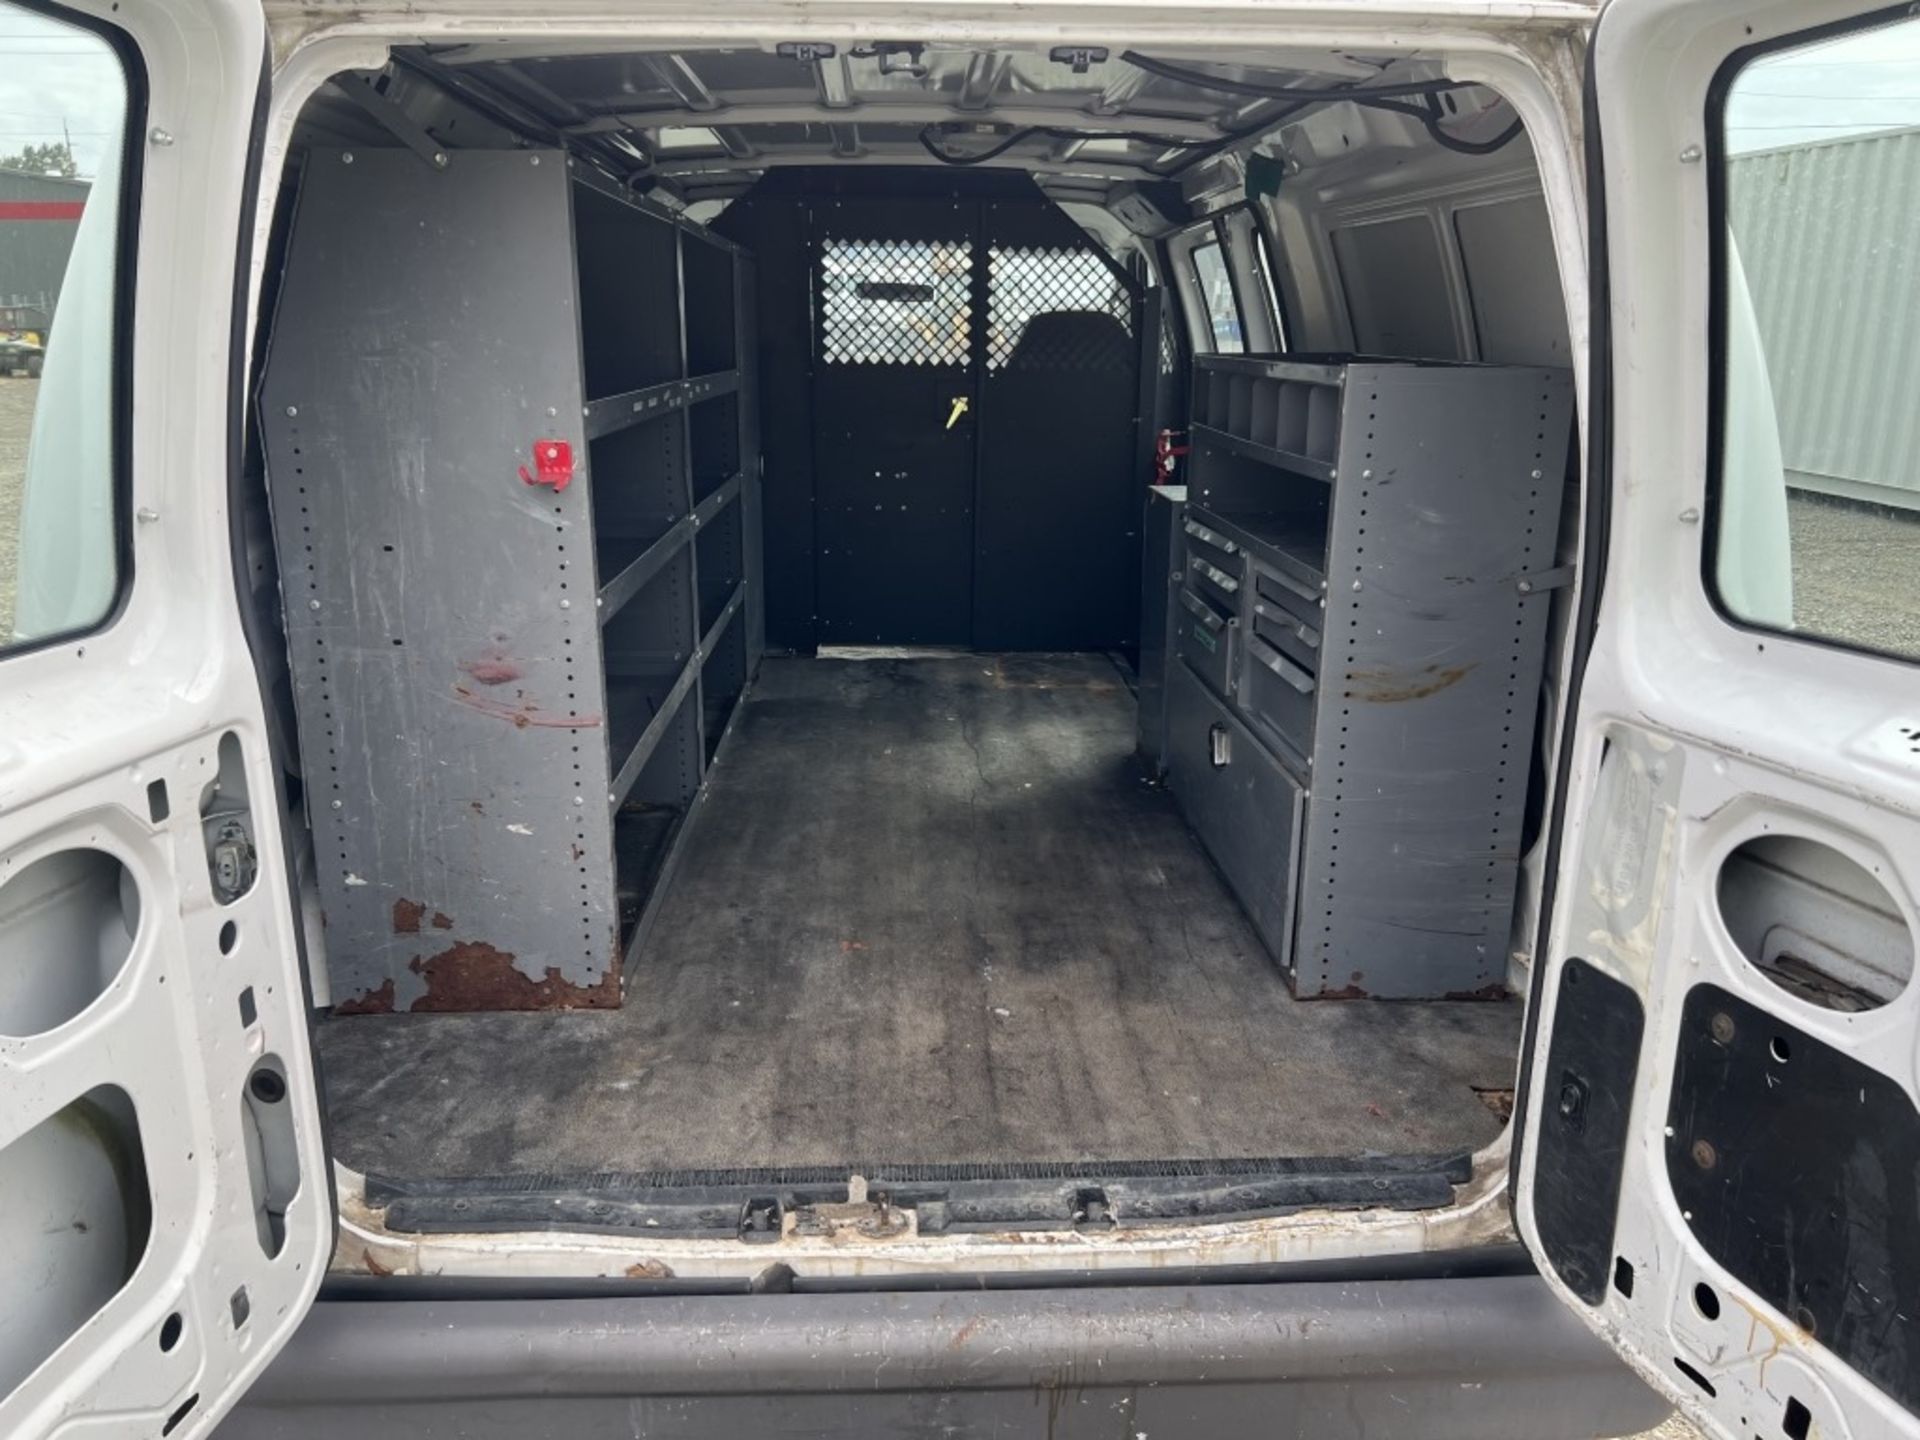 2006 Ford E150 Cargo Van - Image 14 of 21